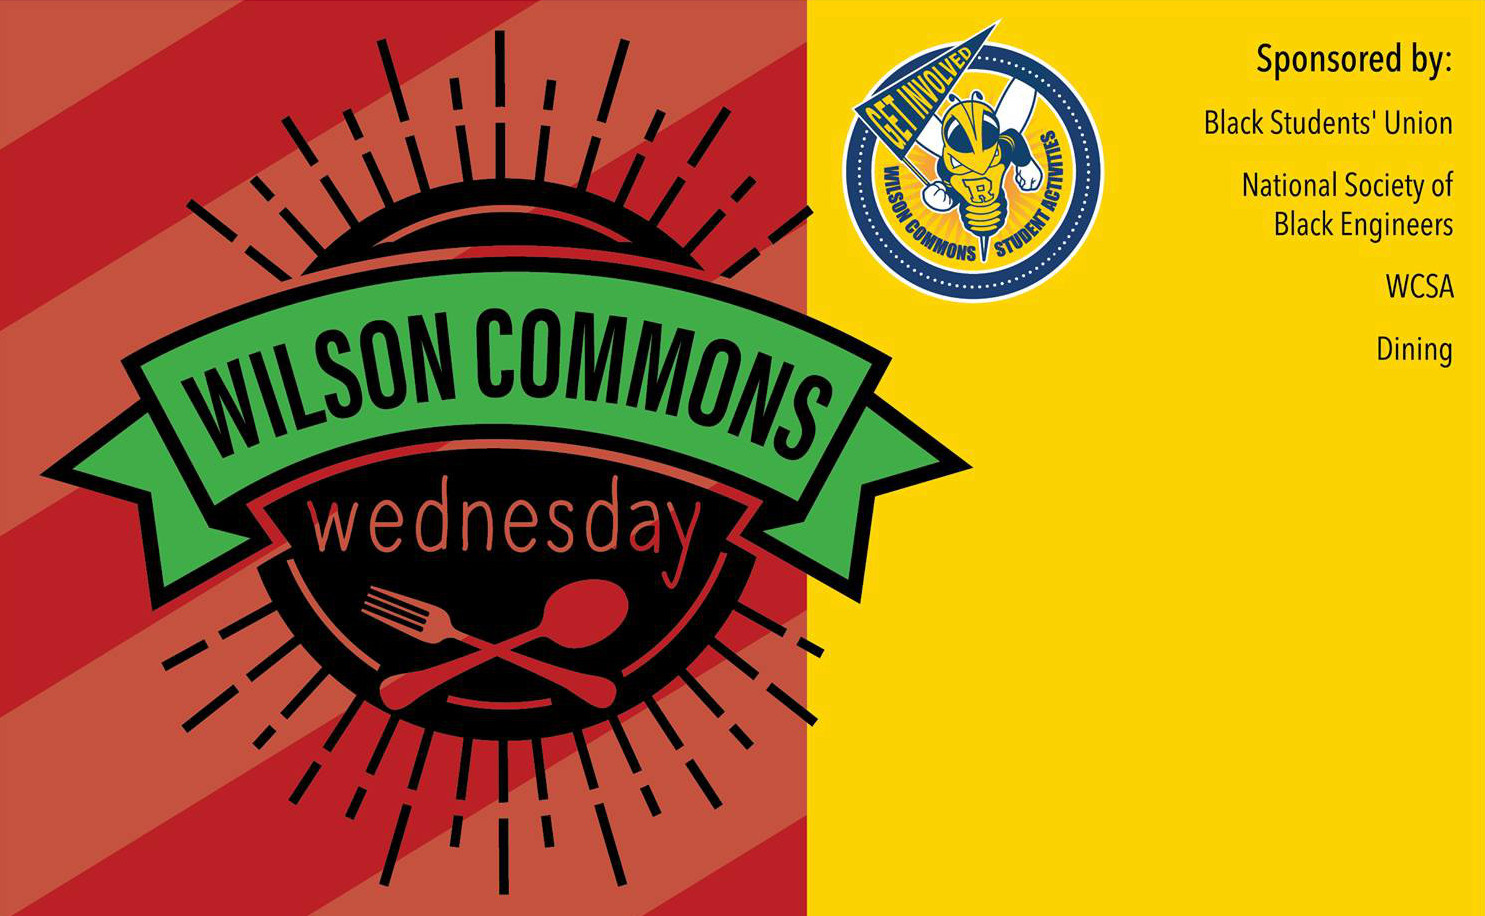 decorative image with stylized text that reads "Wilson Commons Wednesday" in a banner, an emblem of Rocky - a bee mascot holding a flag that reads "Get Involved" and text that reads "Sponsored by Black Students' Union, National Society of Black Engineers, WCSA, Dining."